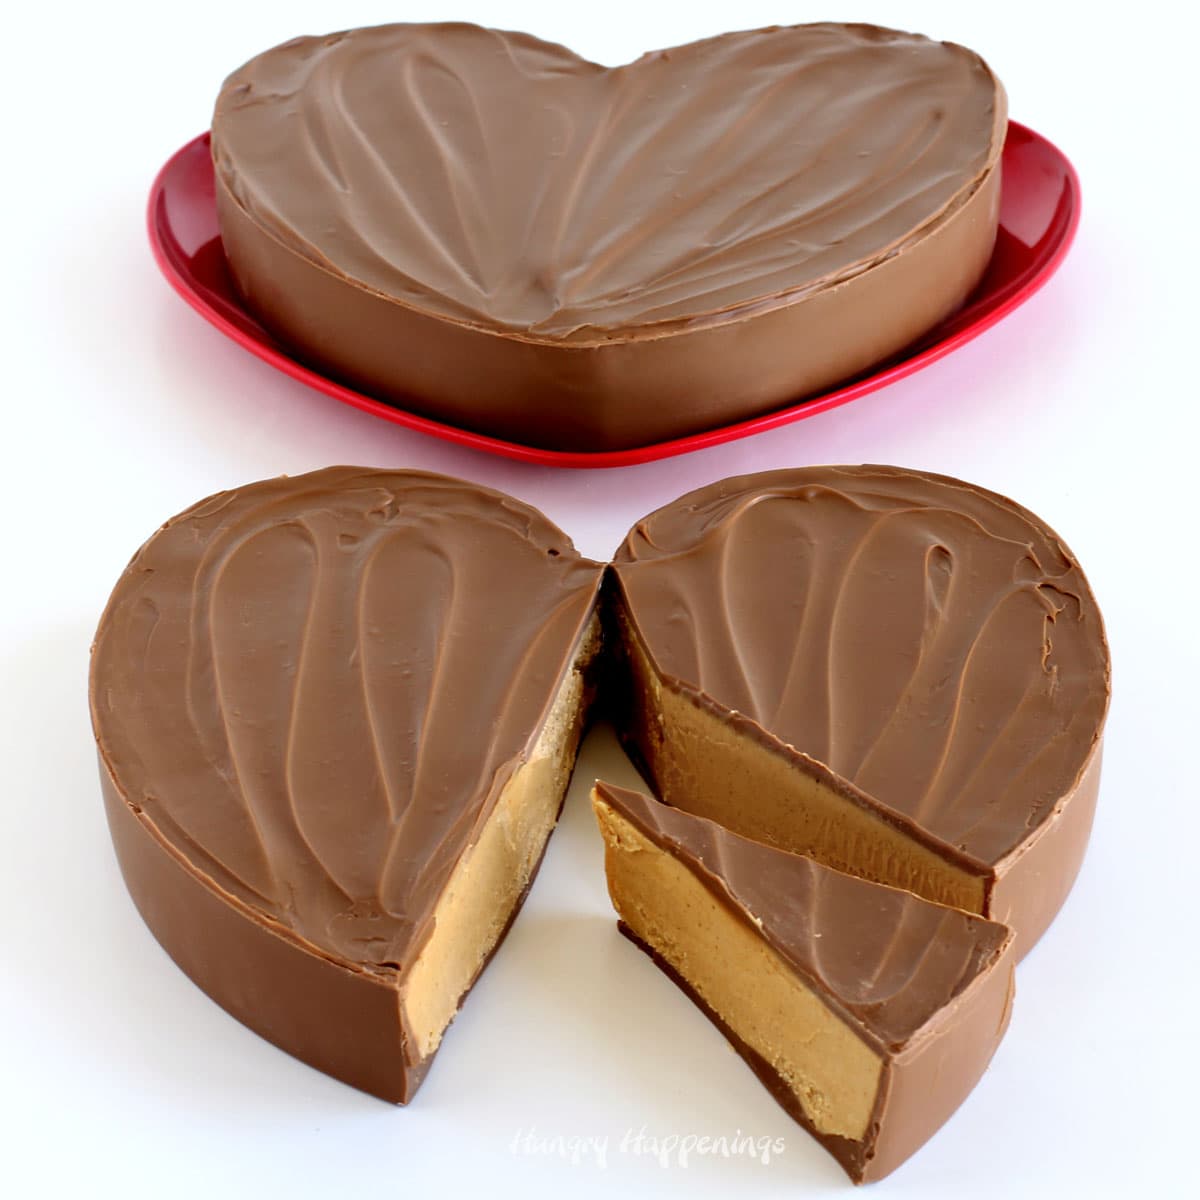 Two giant chocolate peanut butter cup hearts with one cut open showing the peanut butter fudge inside.